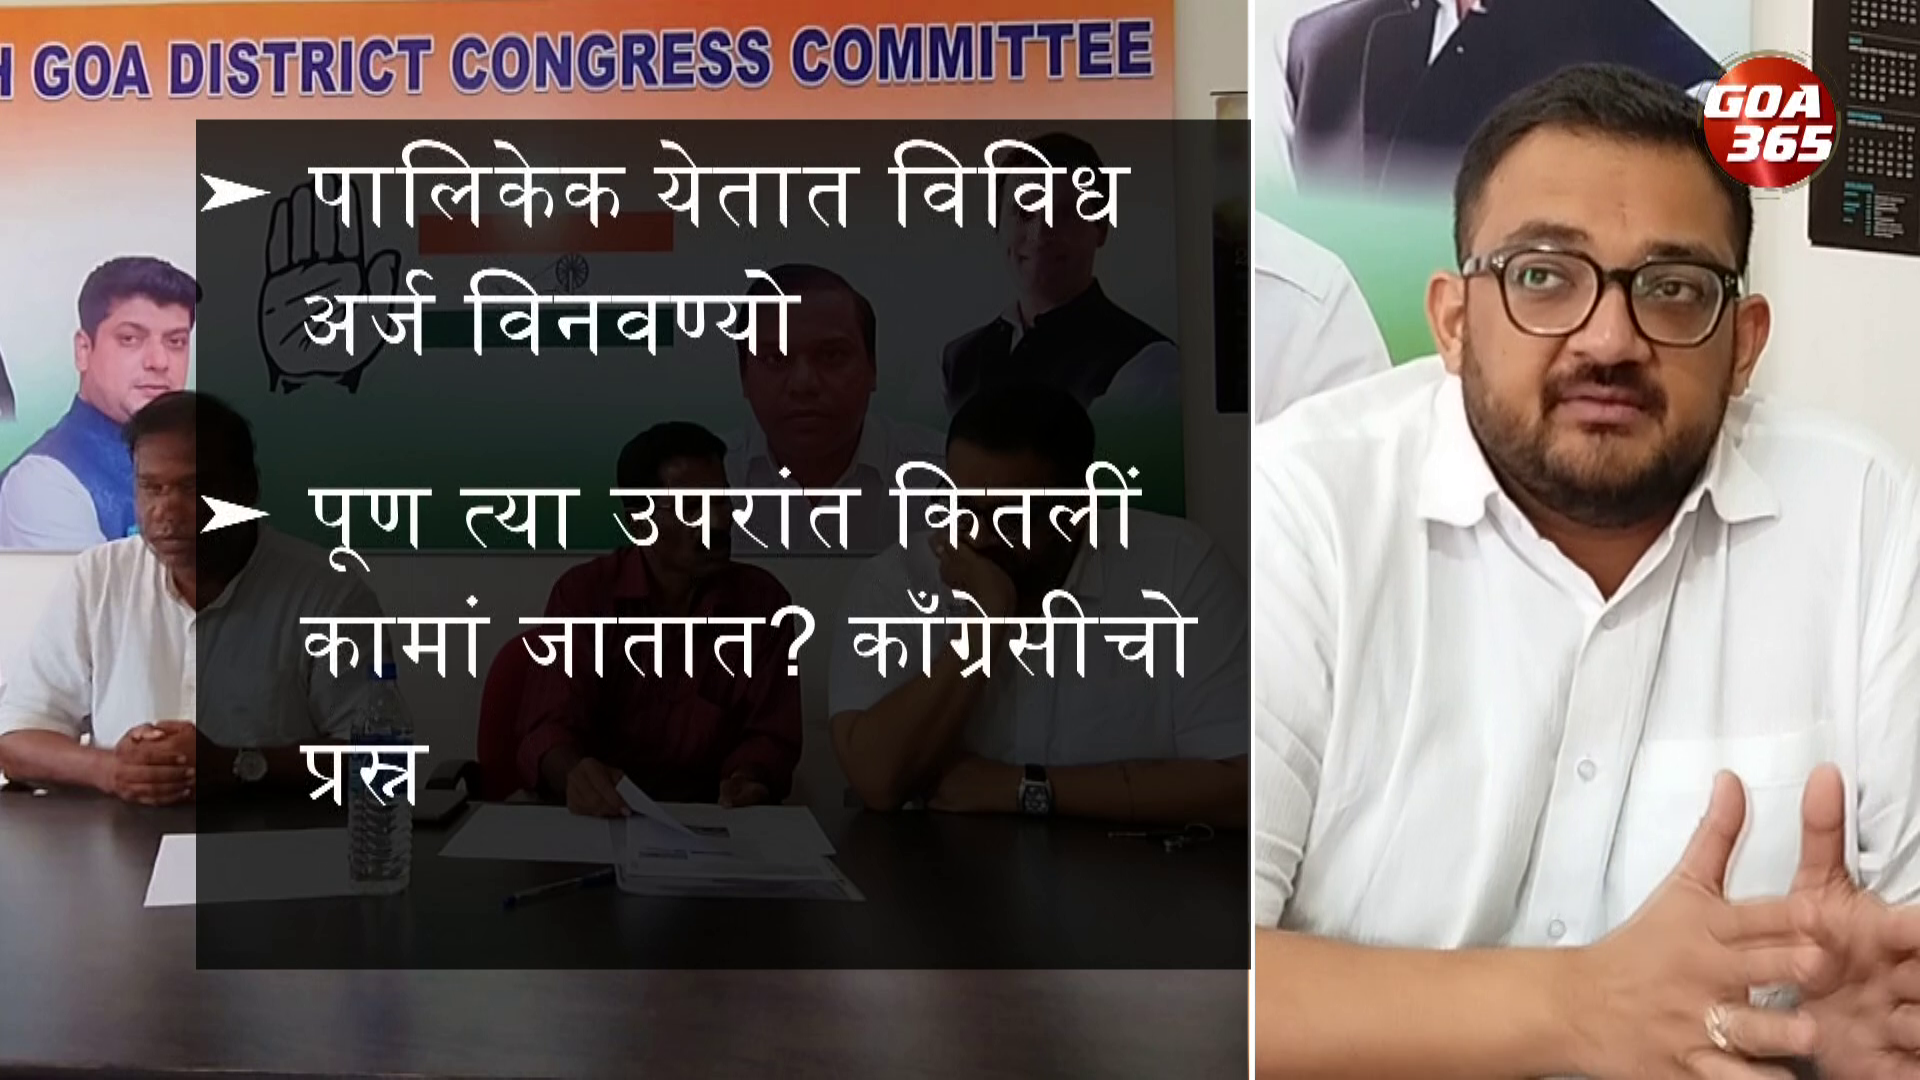 Where have the 20 crores gone? Where is the planning? Congress questions govt || KONAKANI || GOA365